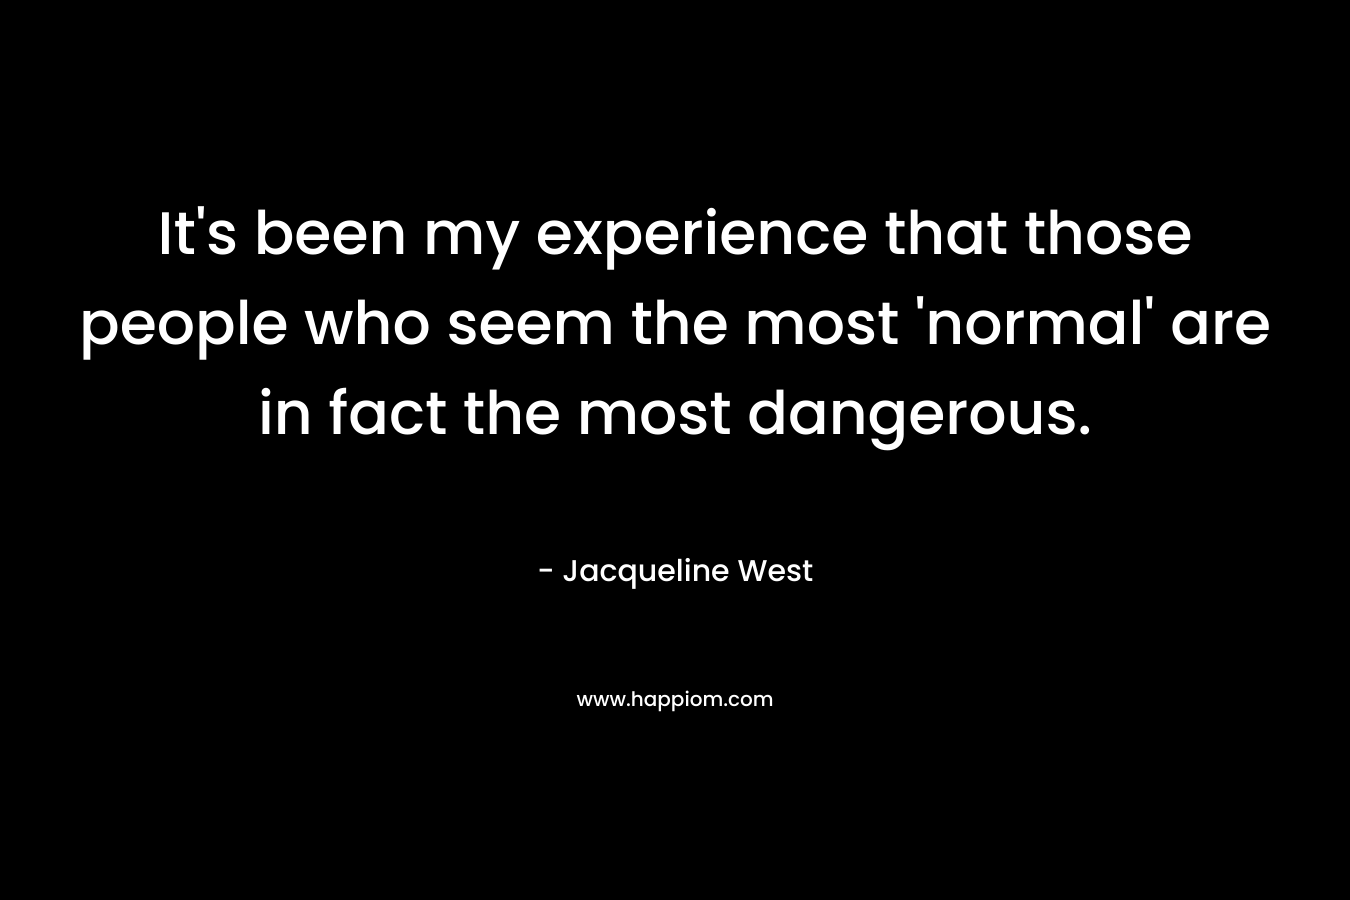 It's been my experience that those people who seem the most 'normal' are in fact the most dangerous.